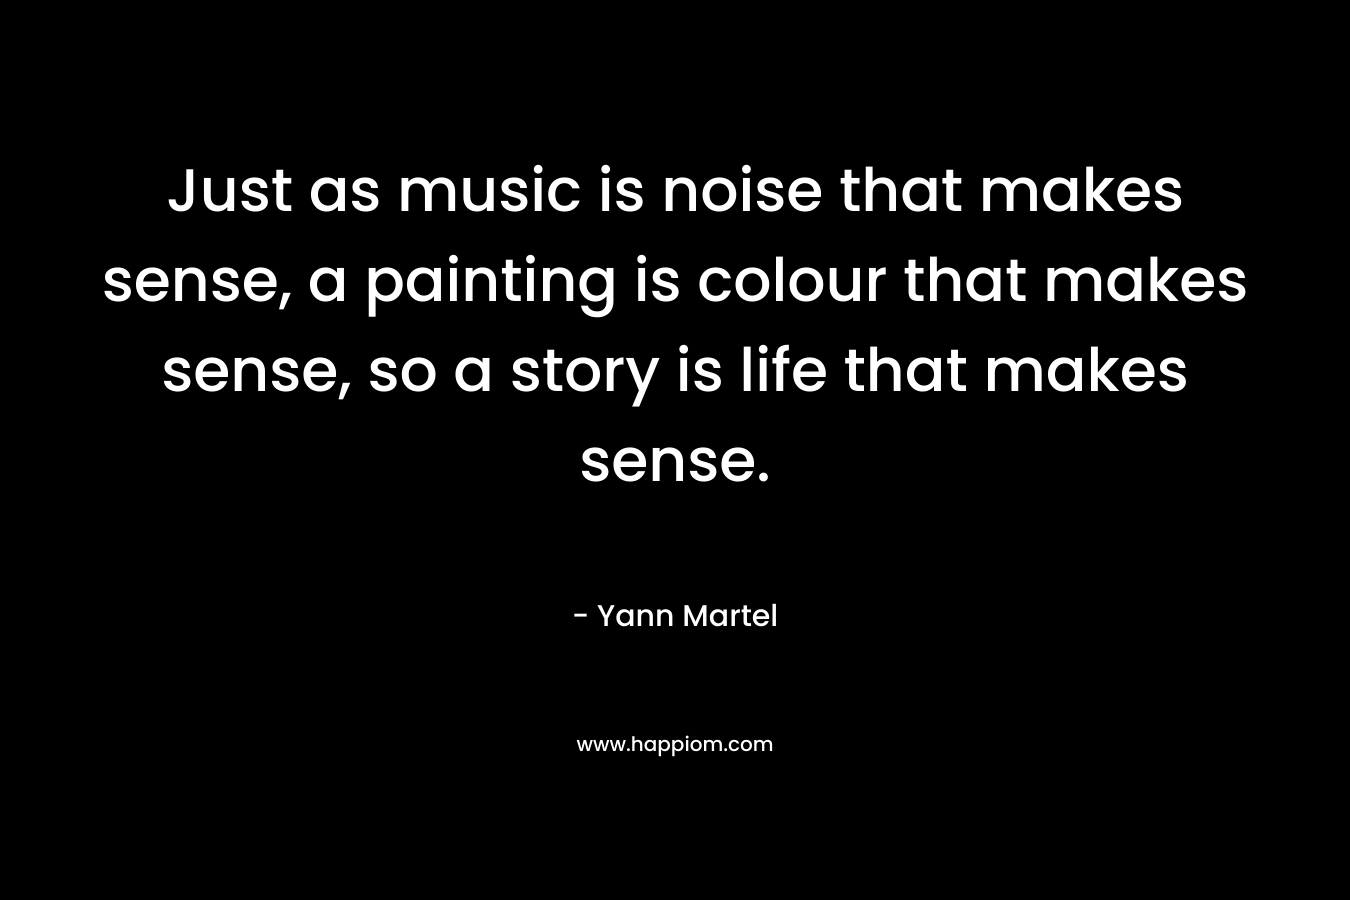 Just as music is noise that makes sense, a painting is colour that makes sense, so a story is life that makes sense.